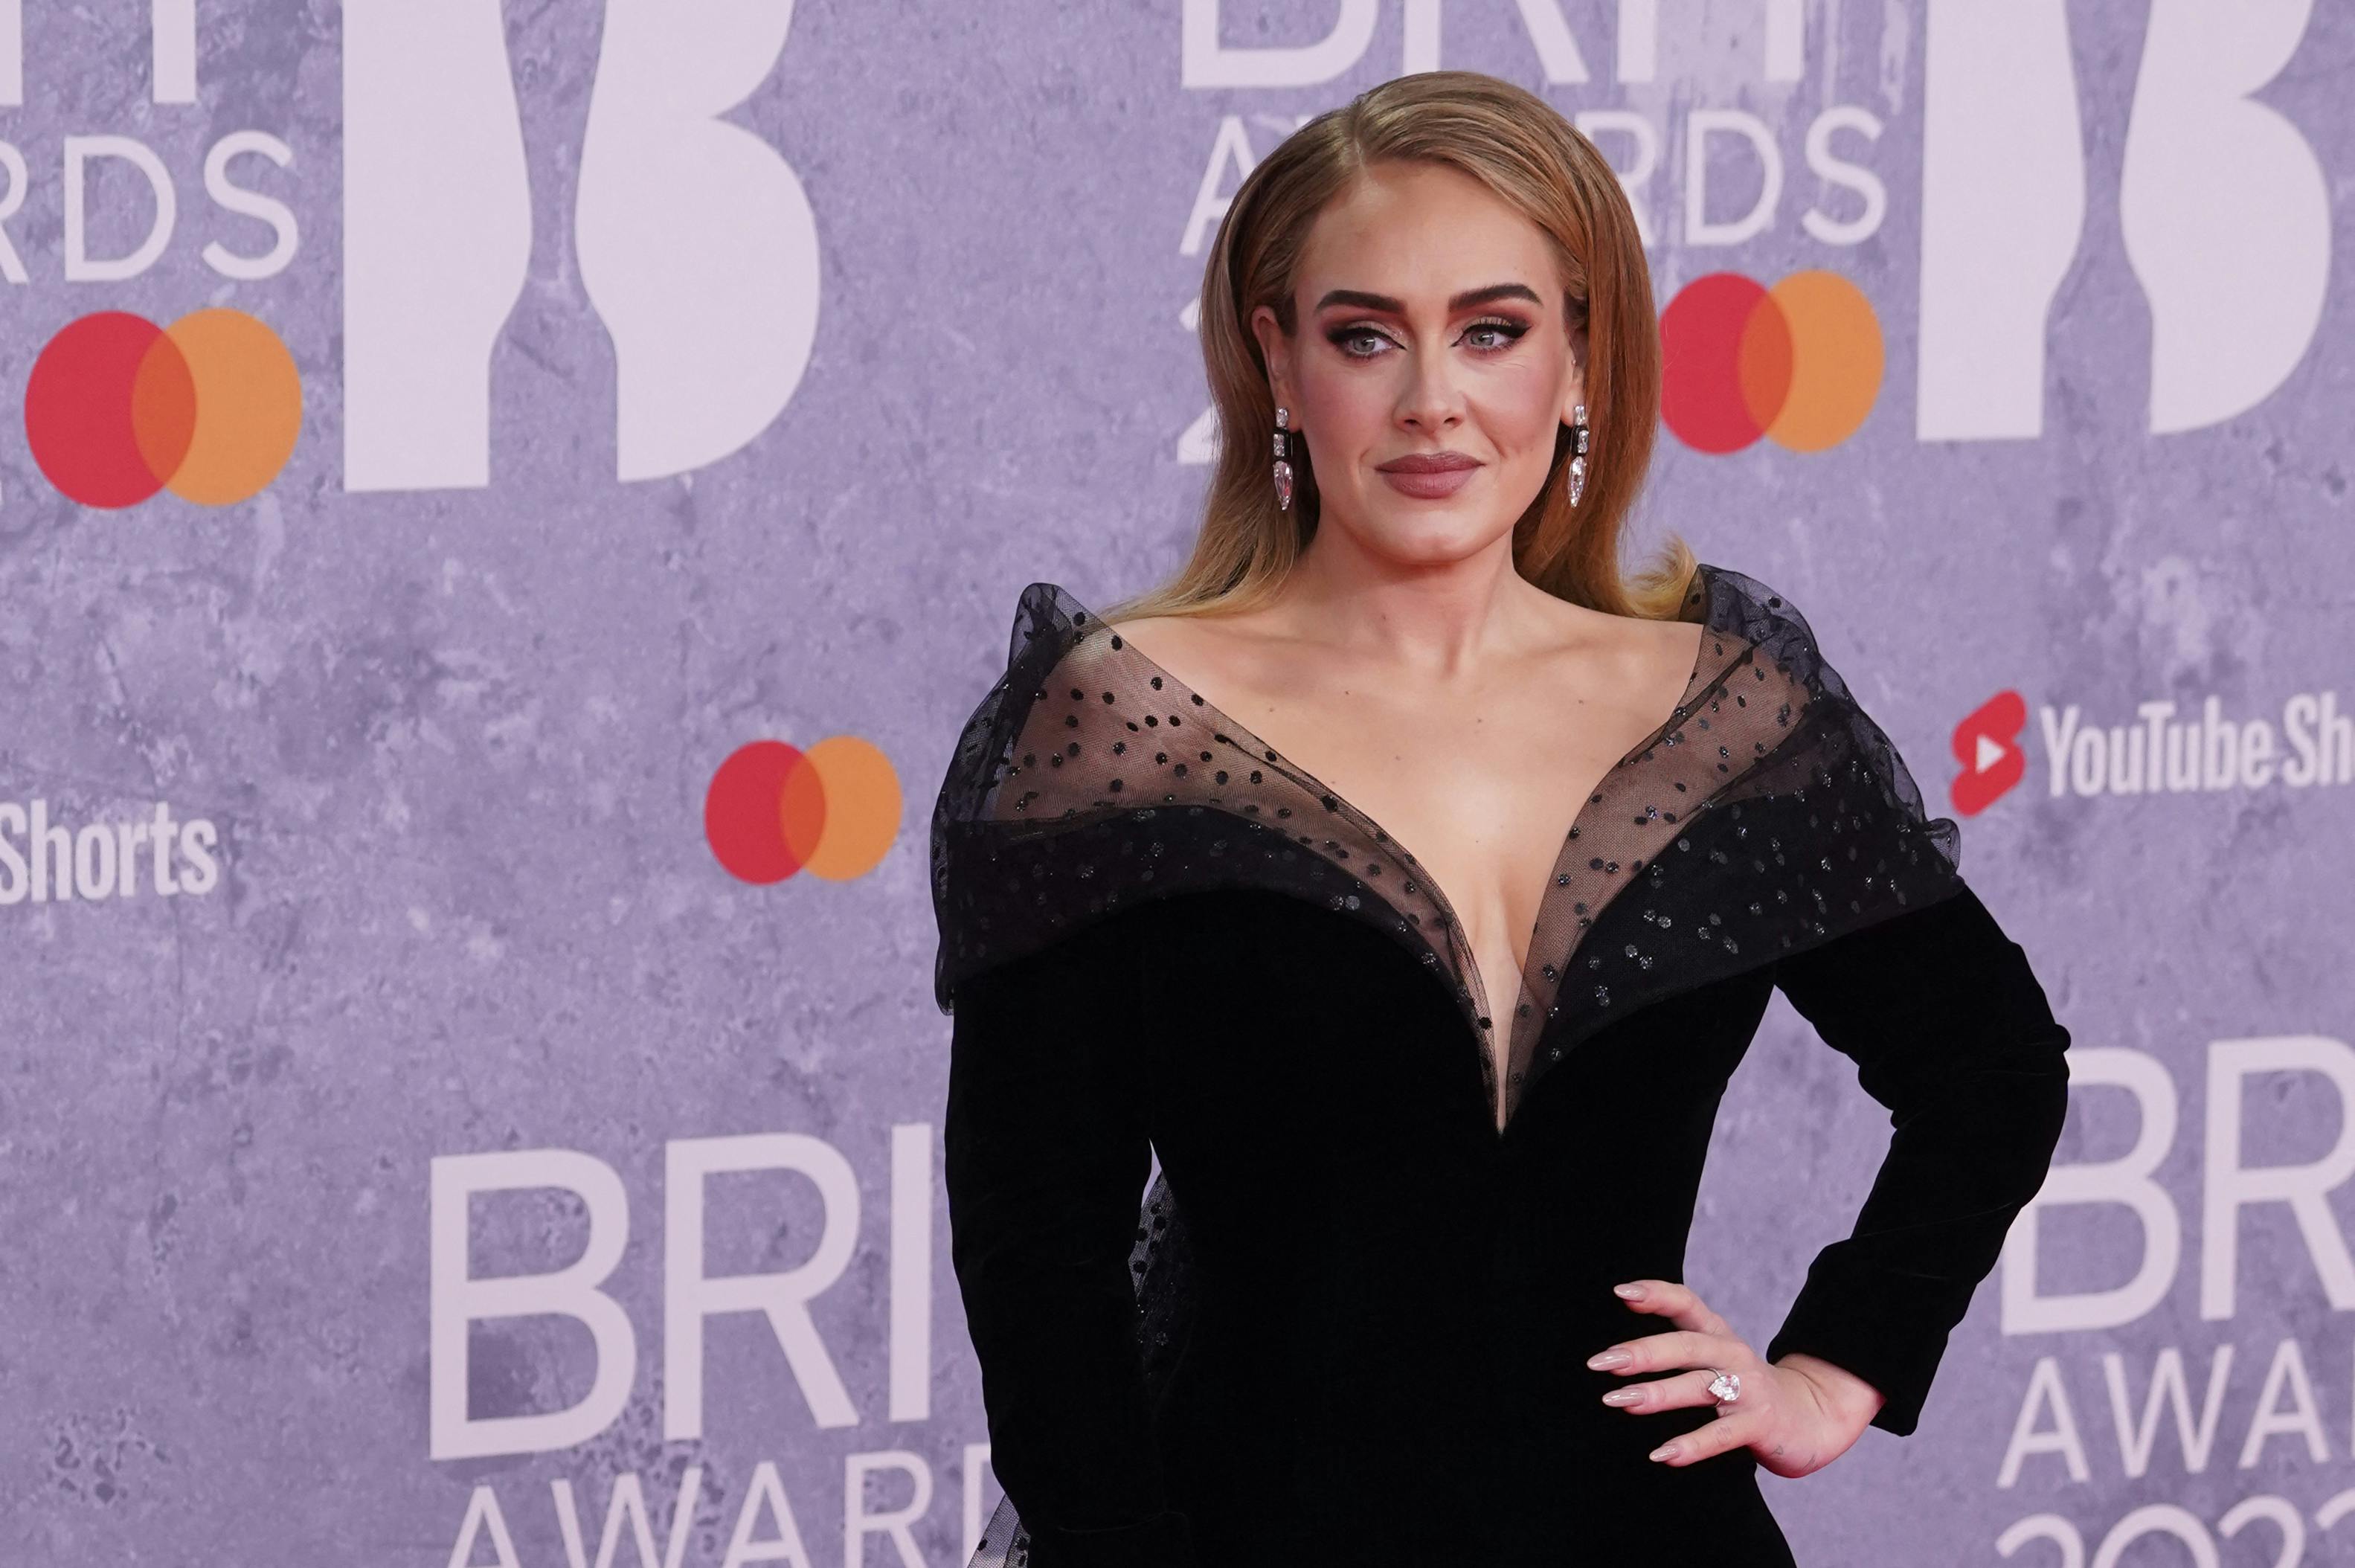 British singer Adele Laurie Blue Adkins aka Adele poses on the red carpet upon her arrival for the BRIT Awards 2022 in London on February 8, 2022. Niklas HALLE'N / AFP